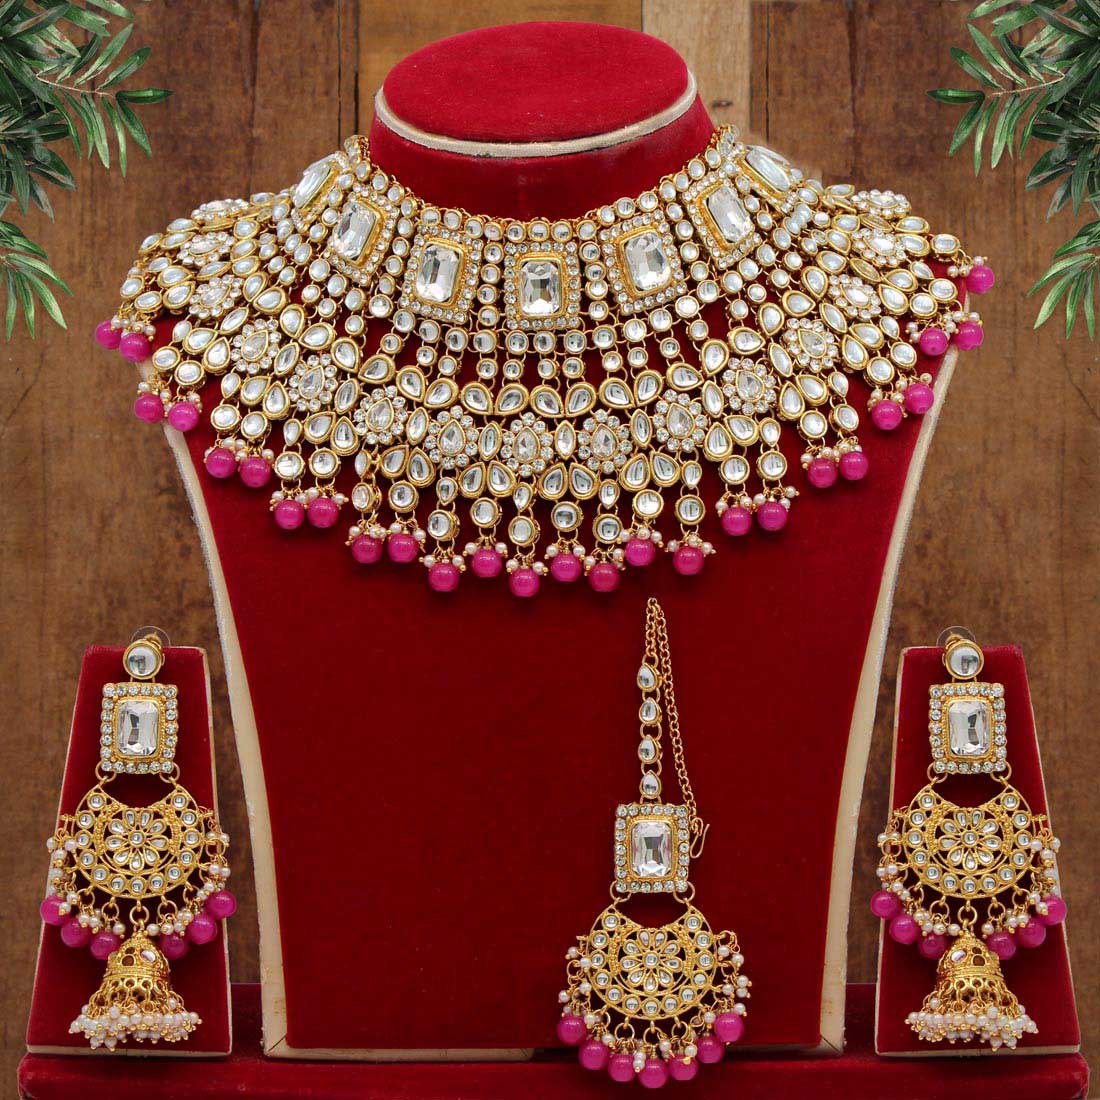 White Color Kundan Necklace With Earrings & Maang Tikka (KN222WHT) Jewellery GetGlit   